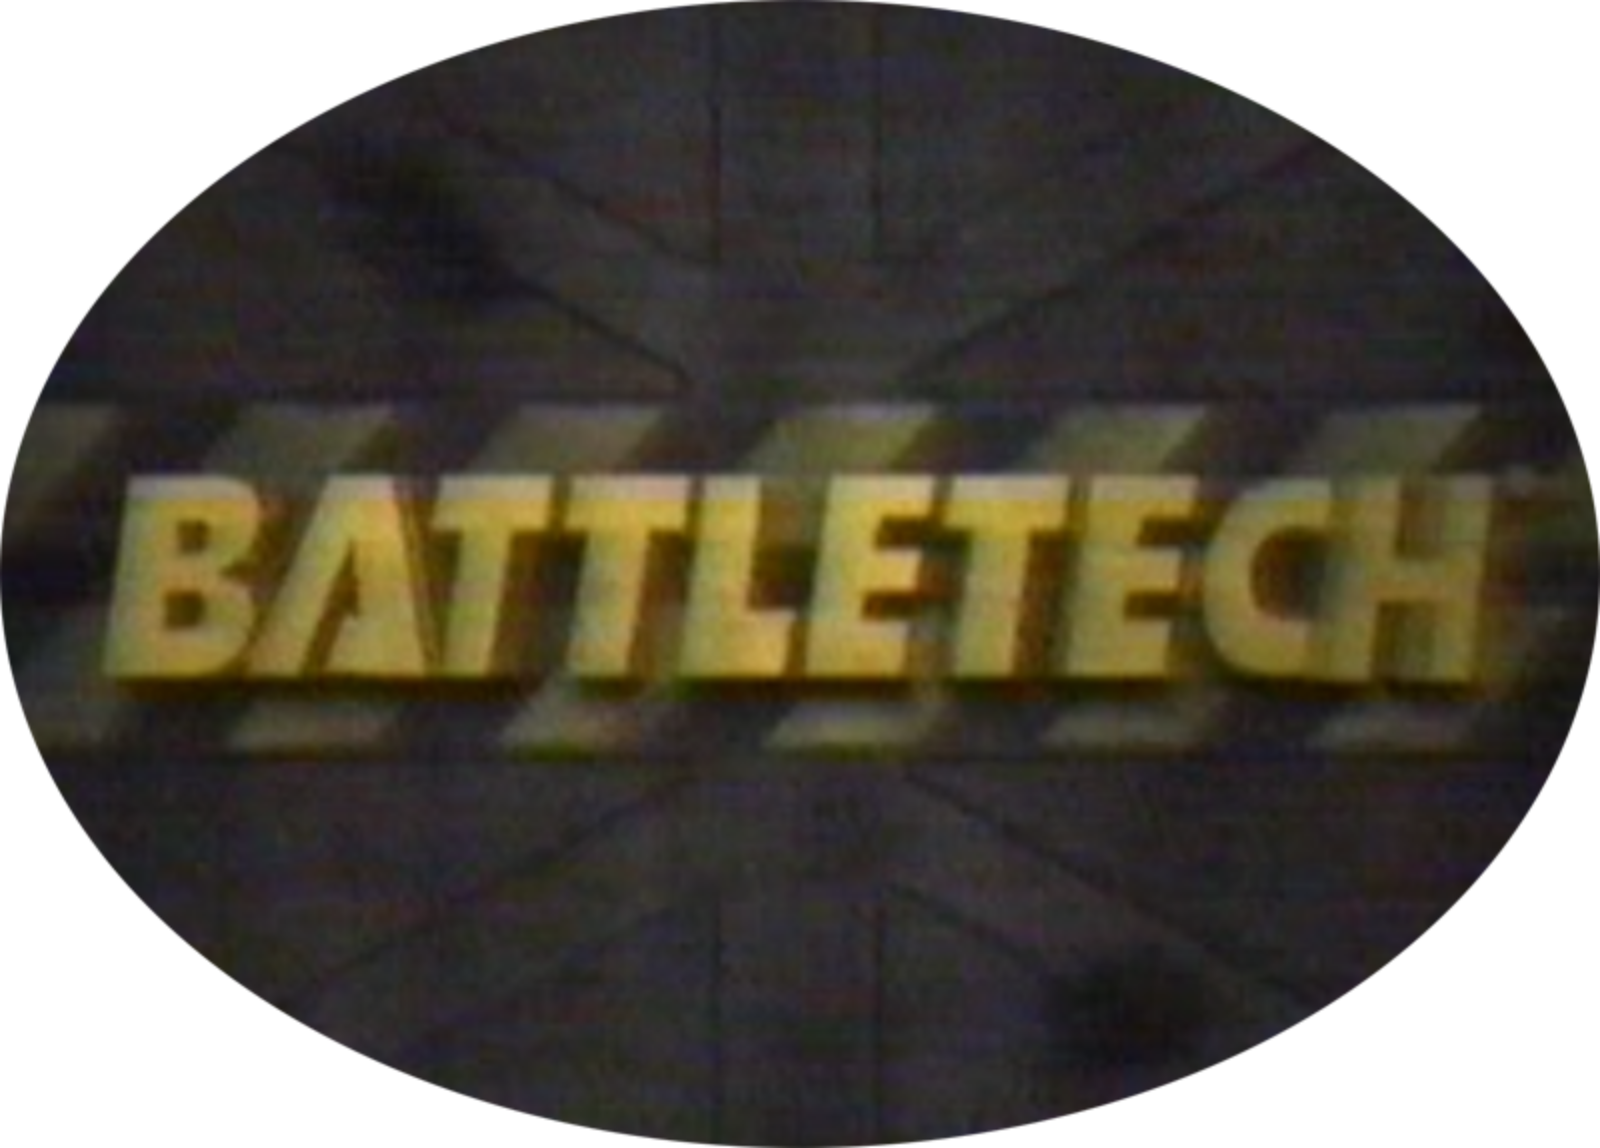 BattleTech: The Animated Series Complete 